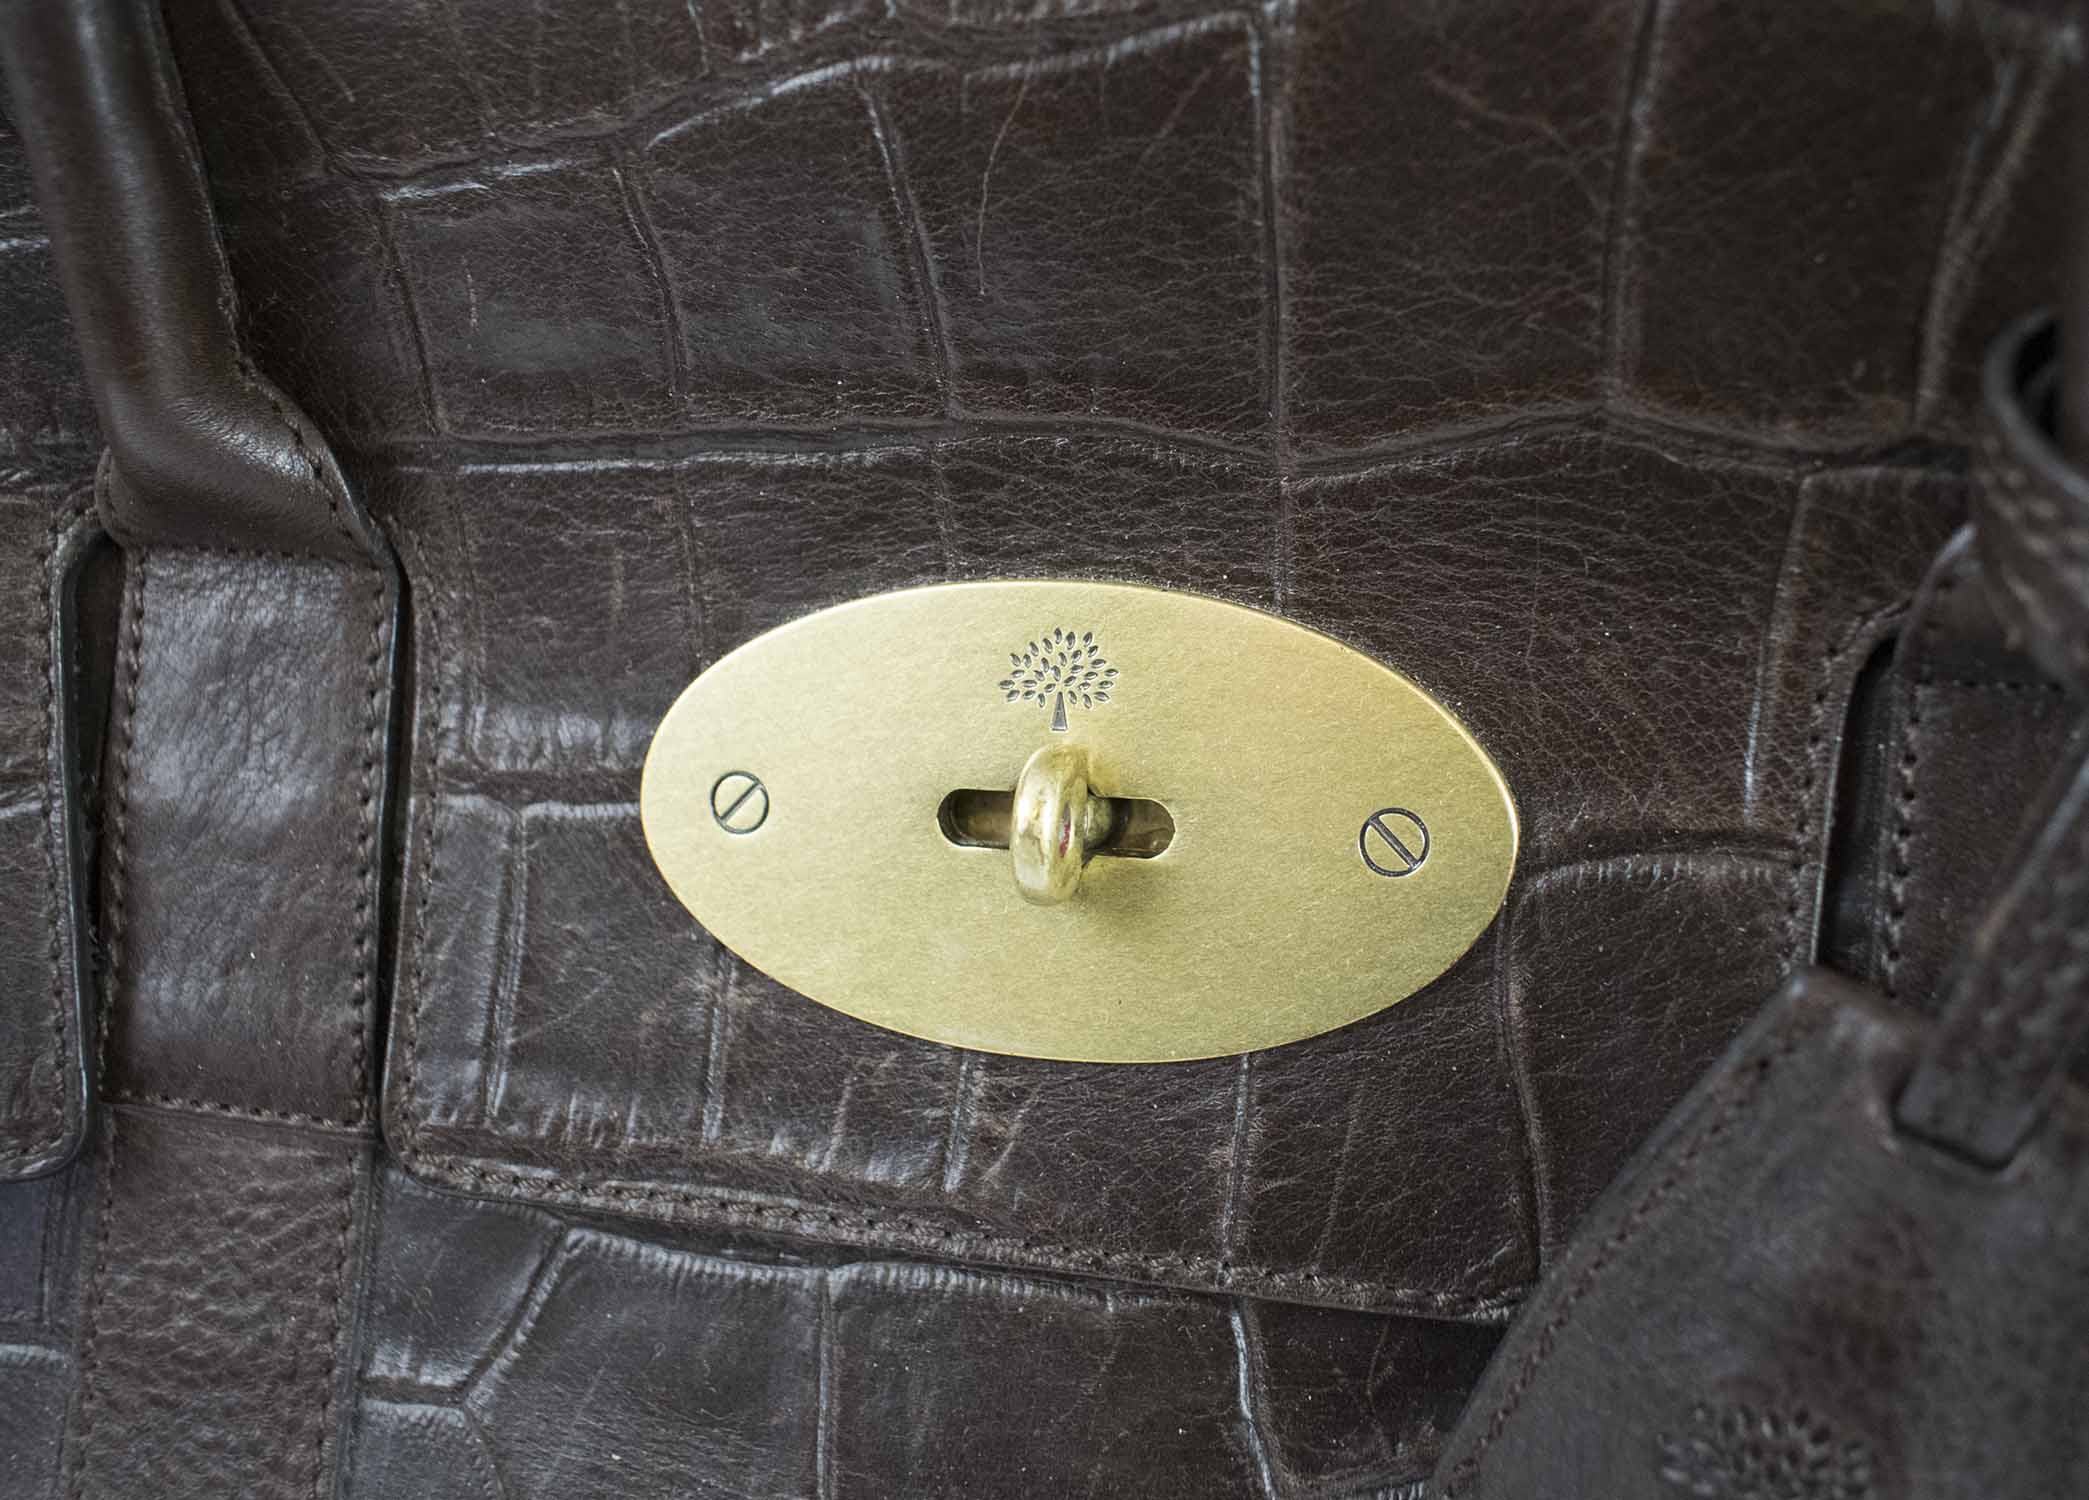 LOUIS VUITTON SPEEDY 30, epi leather black LV initials on the front, side  pocket, silver tone hardware and padlock (no keys), two top handles, fabric  lining, 30cm x 19cm H x 15cm.